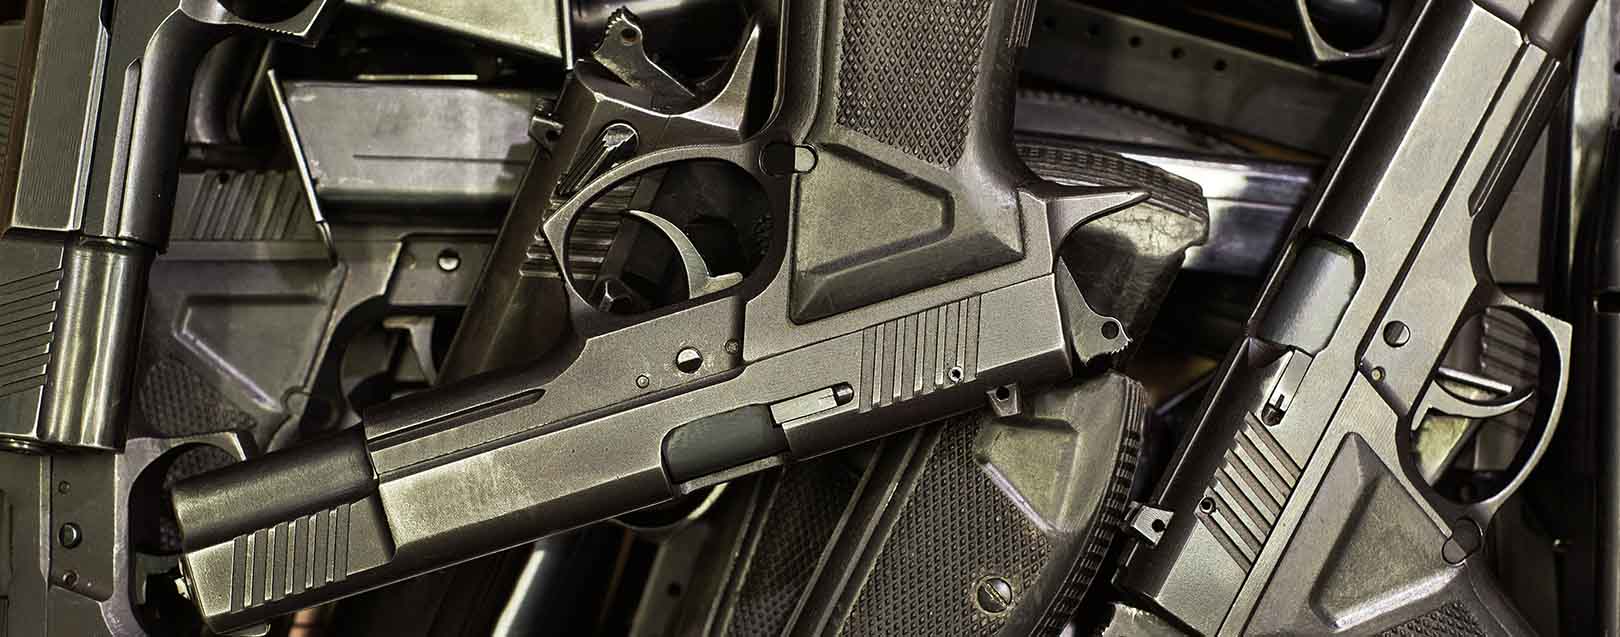 Kalyani group, Beretta to join hands for small arms